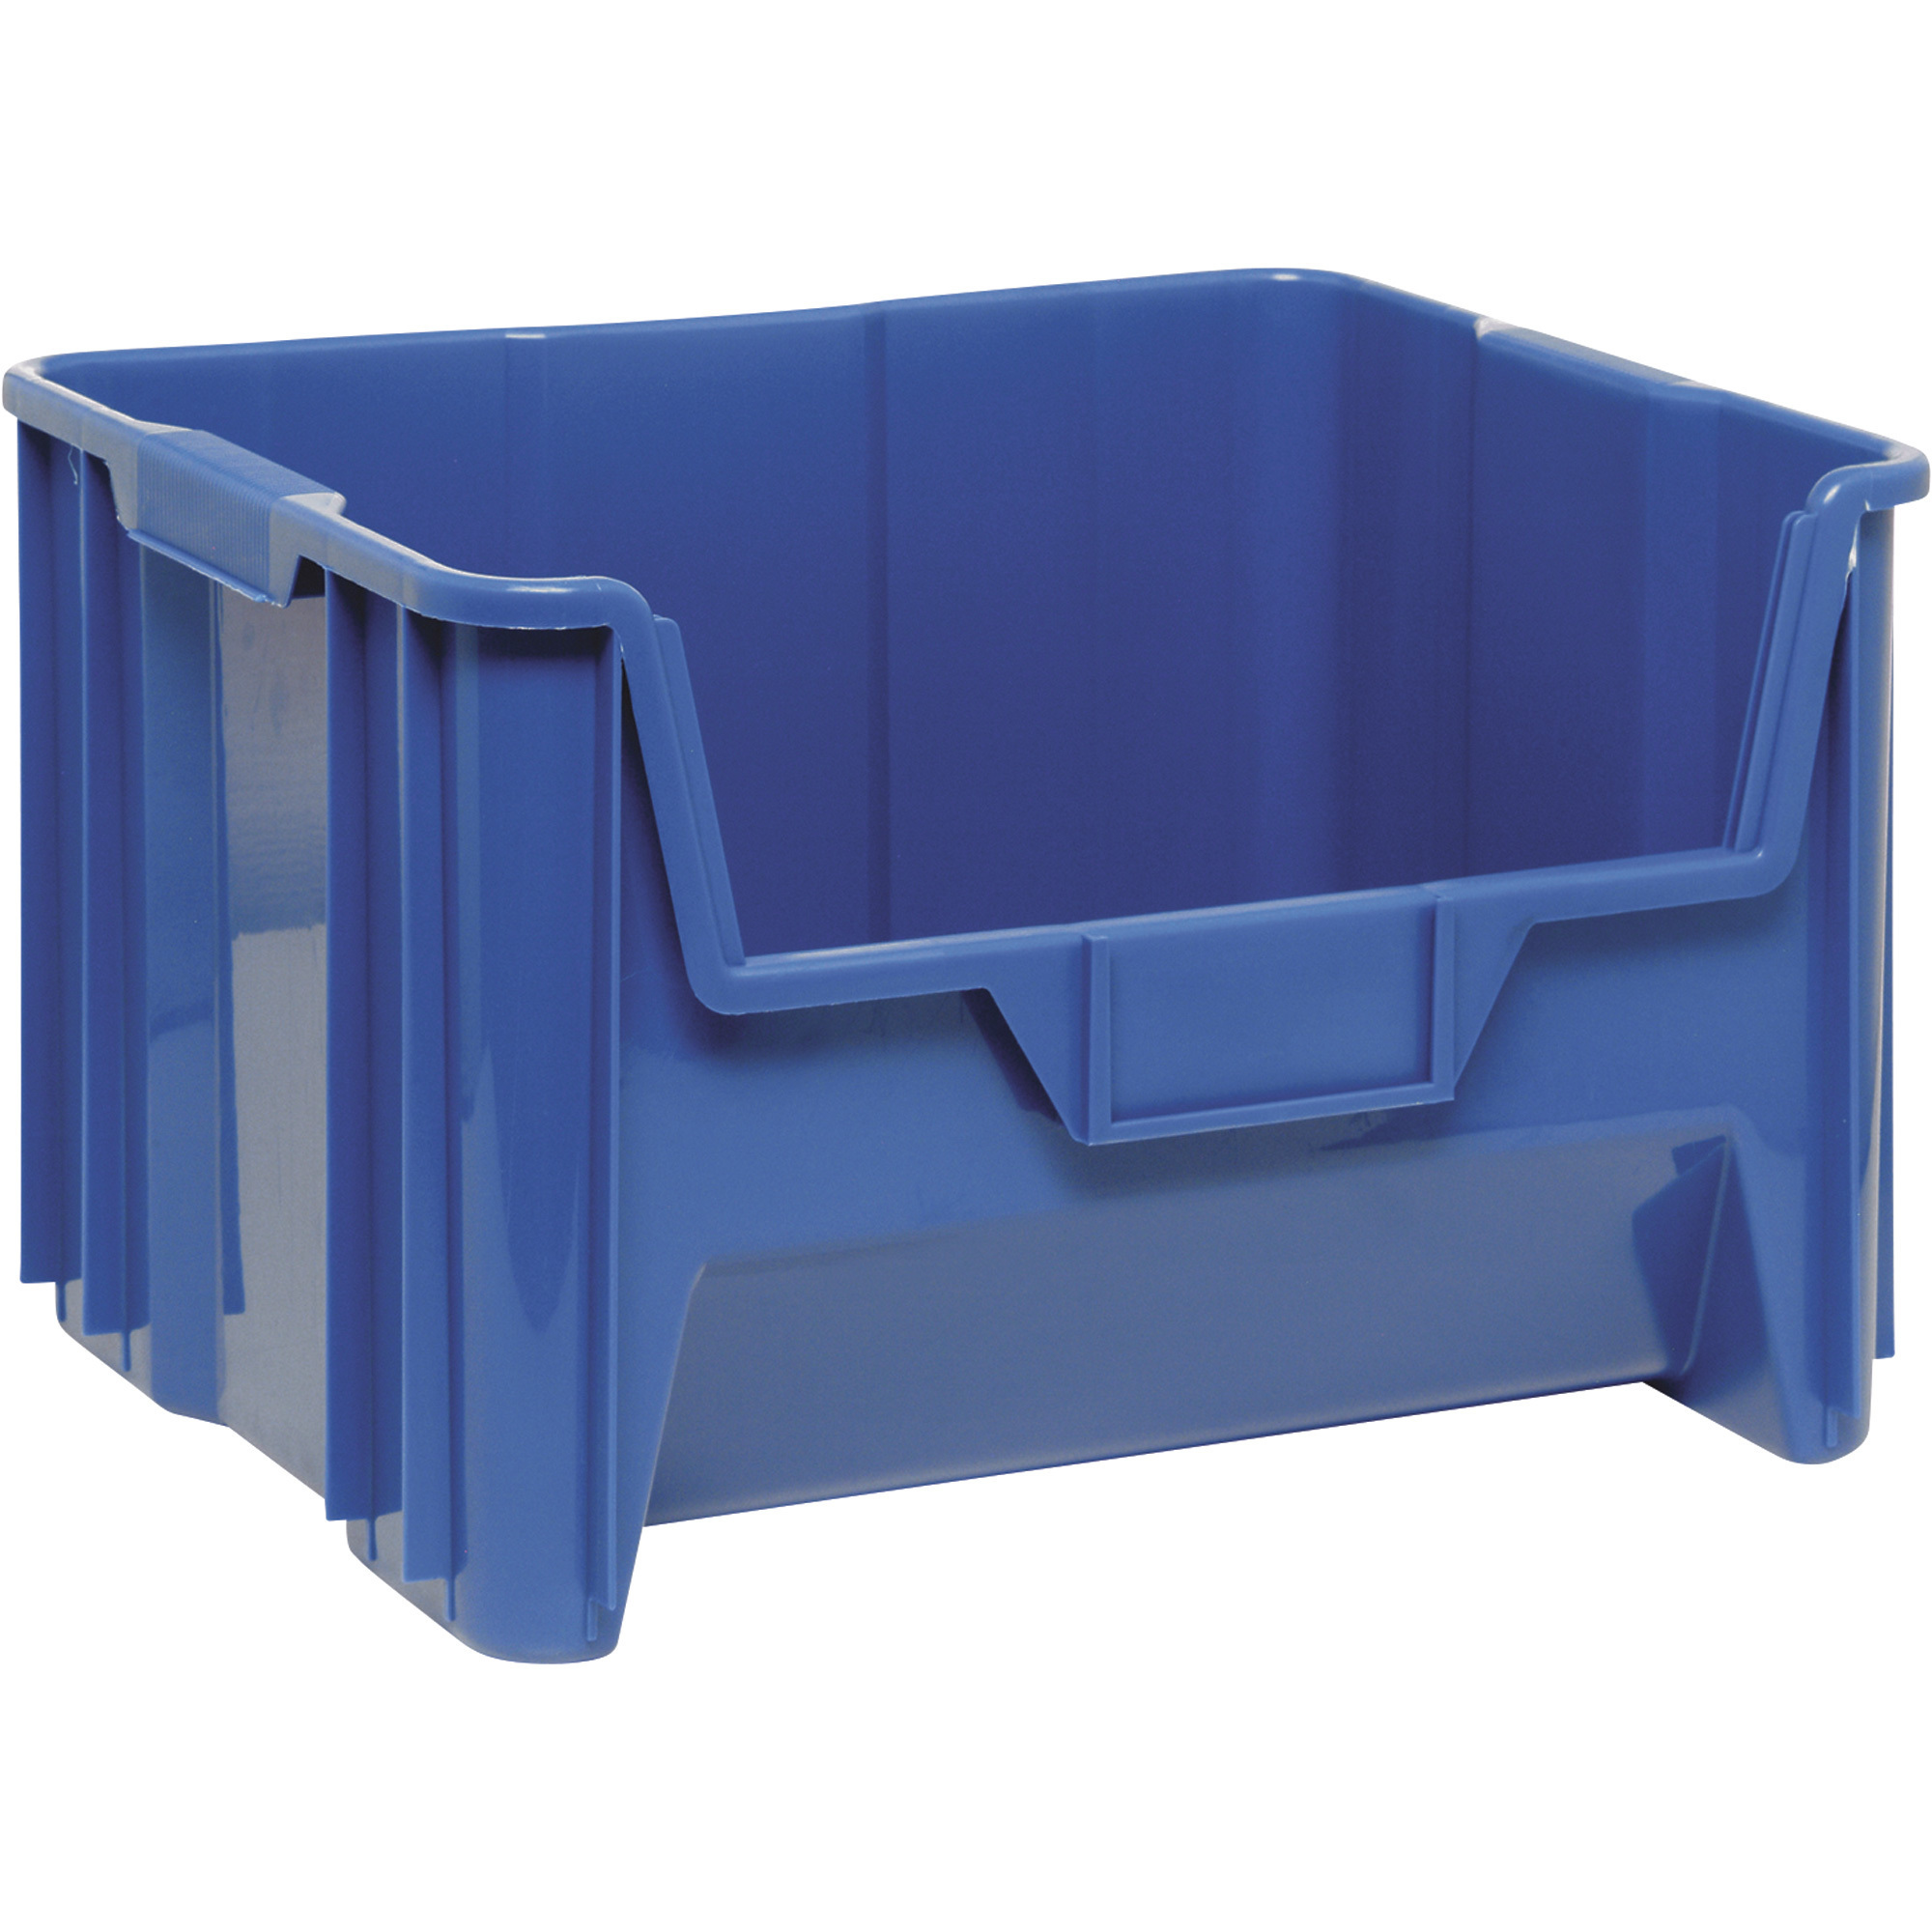 Quantum Storage Giant Stack Container, 3-Pack, 15 1/4Inch L x 19 7/8Inch W x 12 7/16Inch H, Blue, Model QGH700BLCS